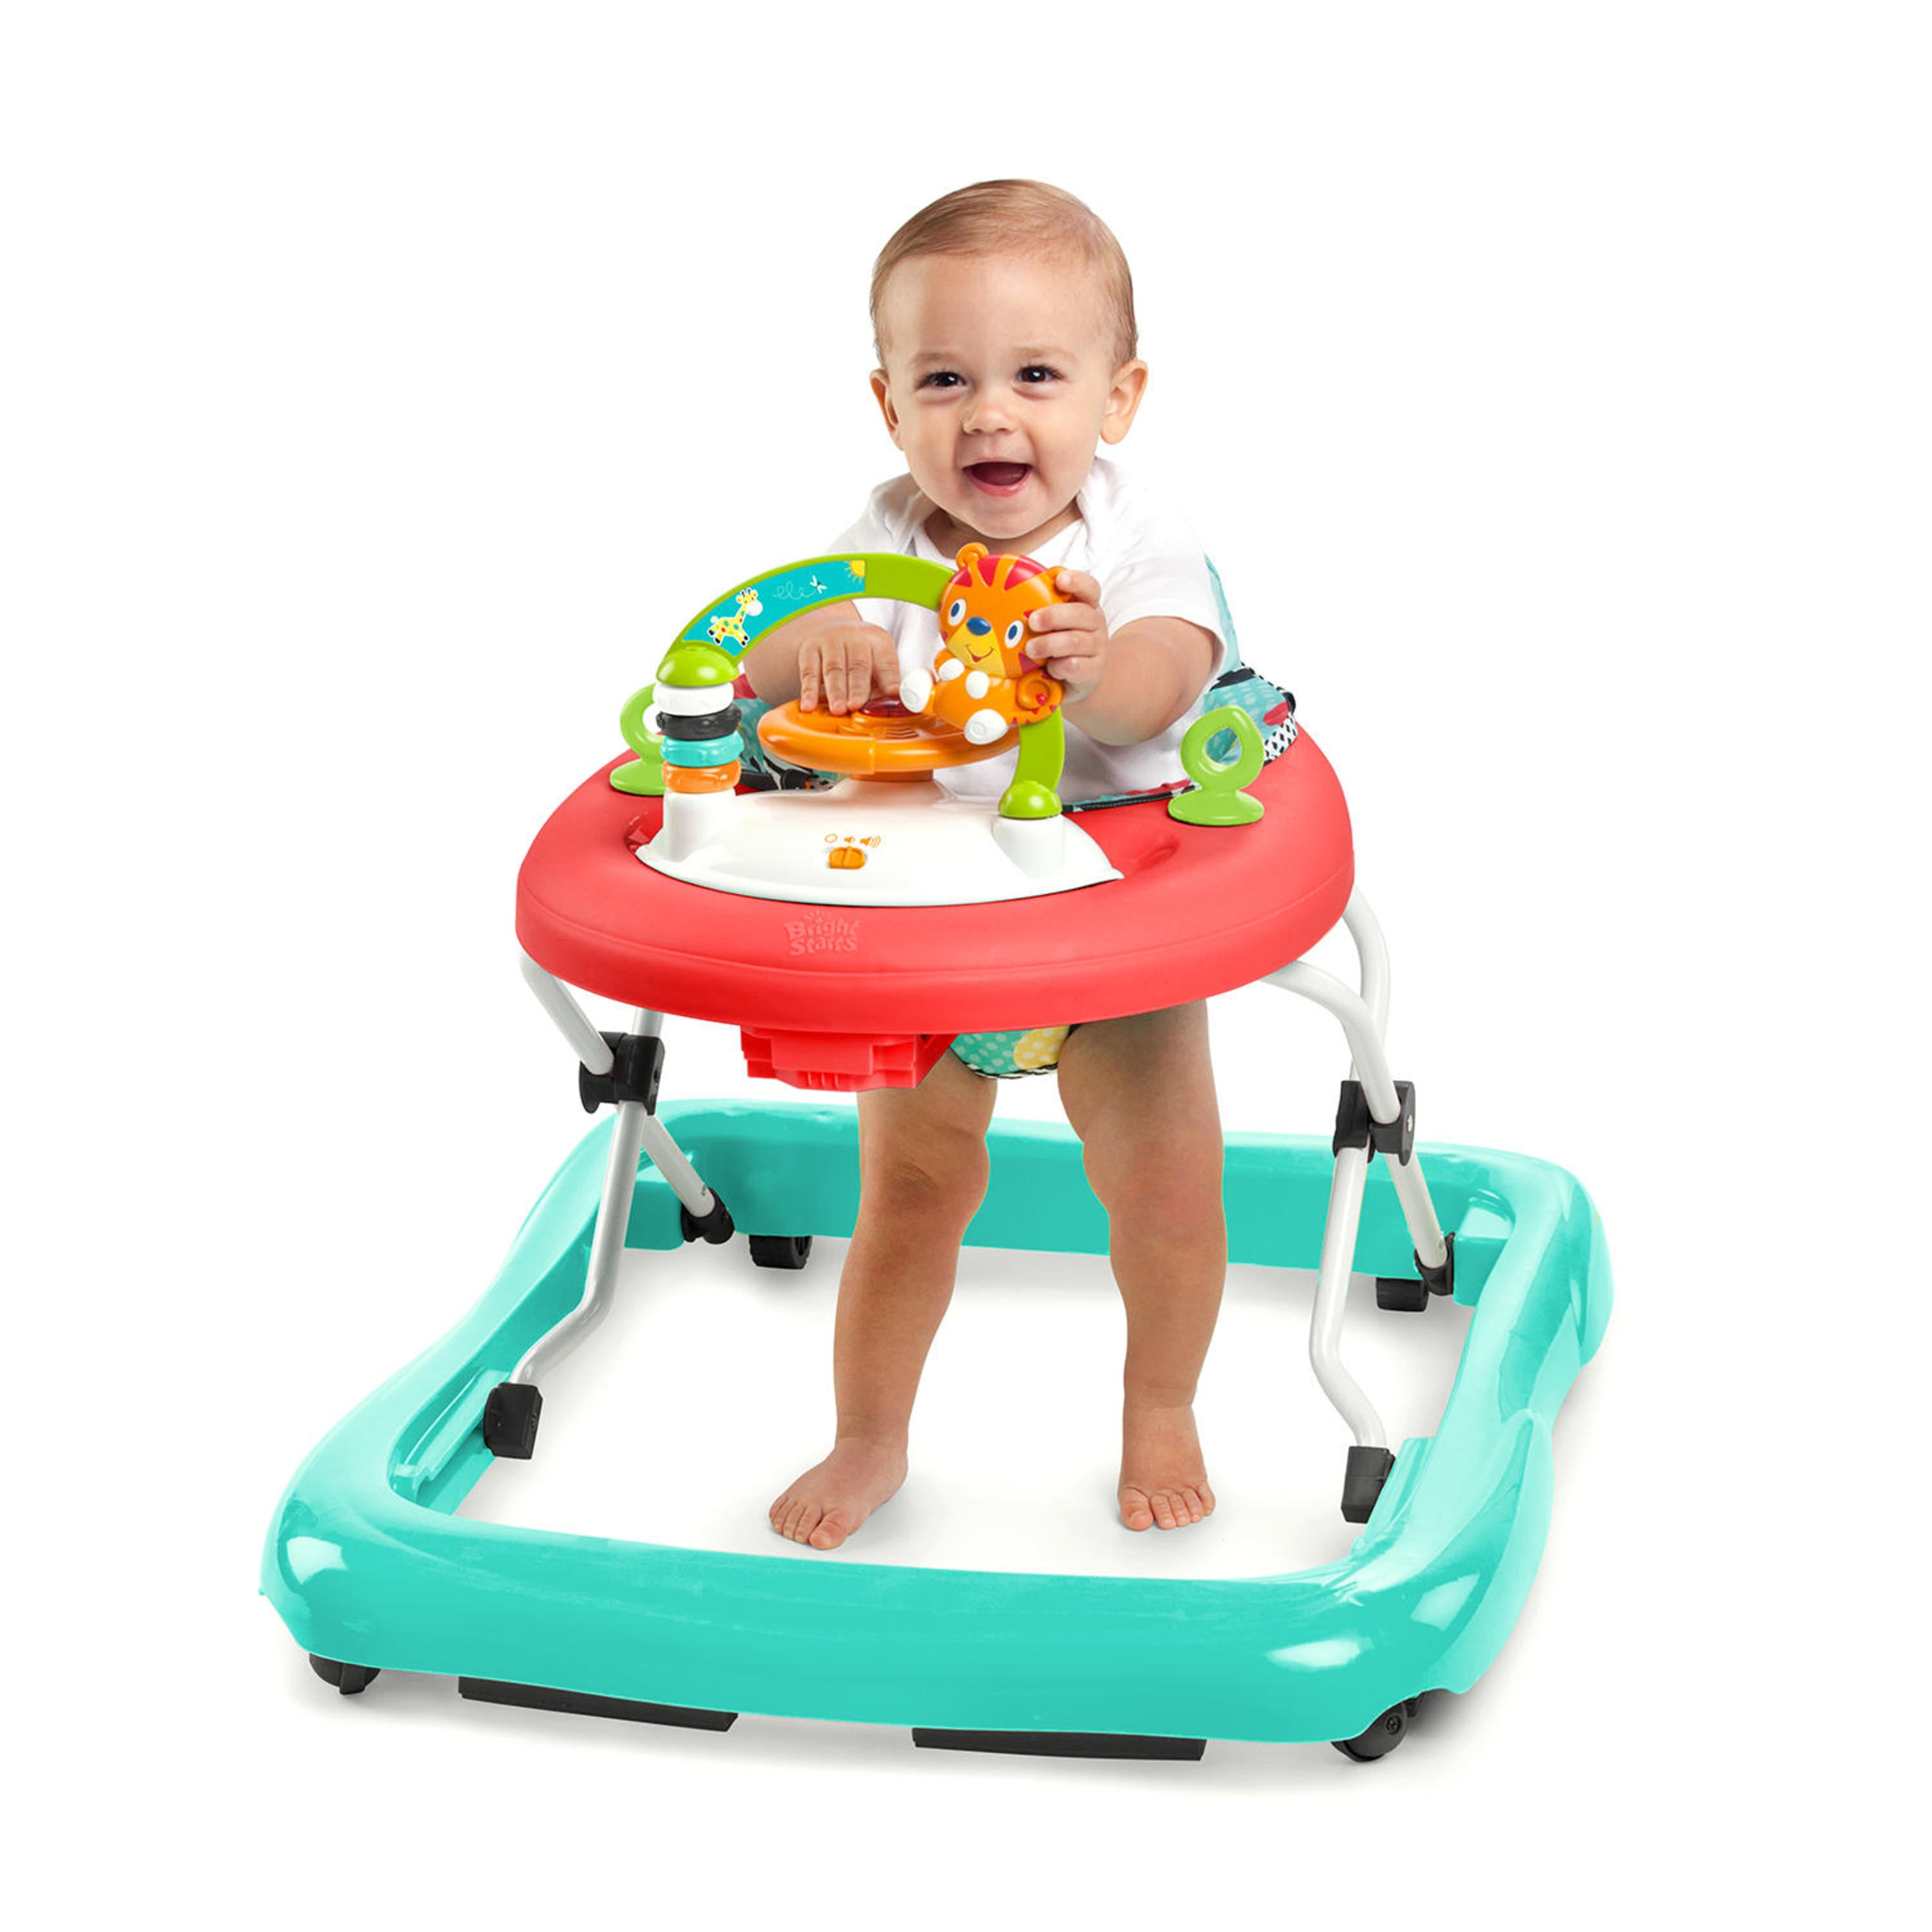  Bright Starts JuneBerry Walk-A-Bout Walker with Easy Fold  Frame for Storage, Ages 6 months + : Baby Walkers : Baby